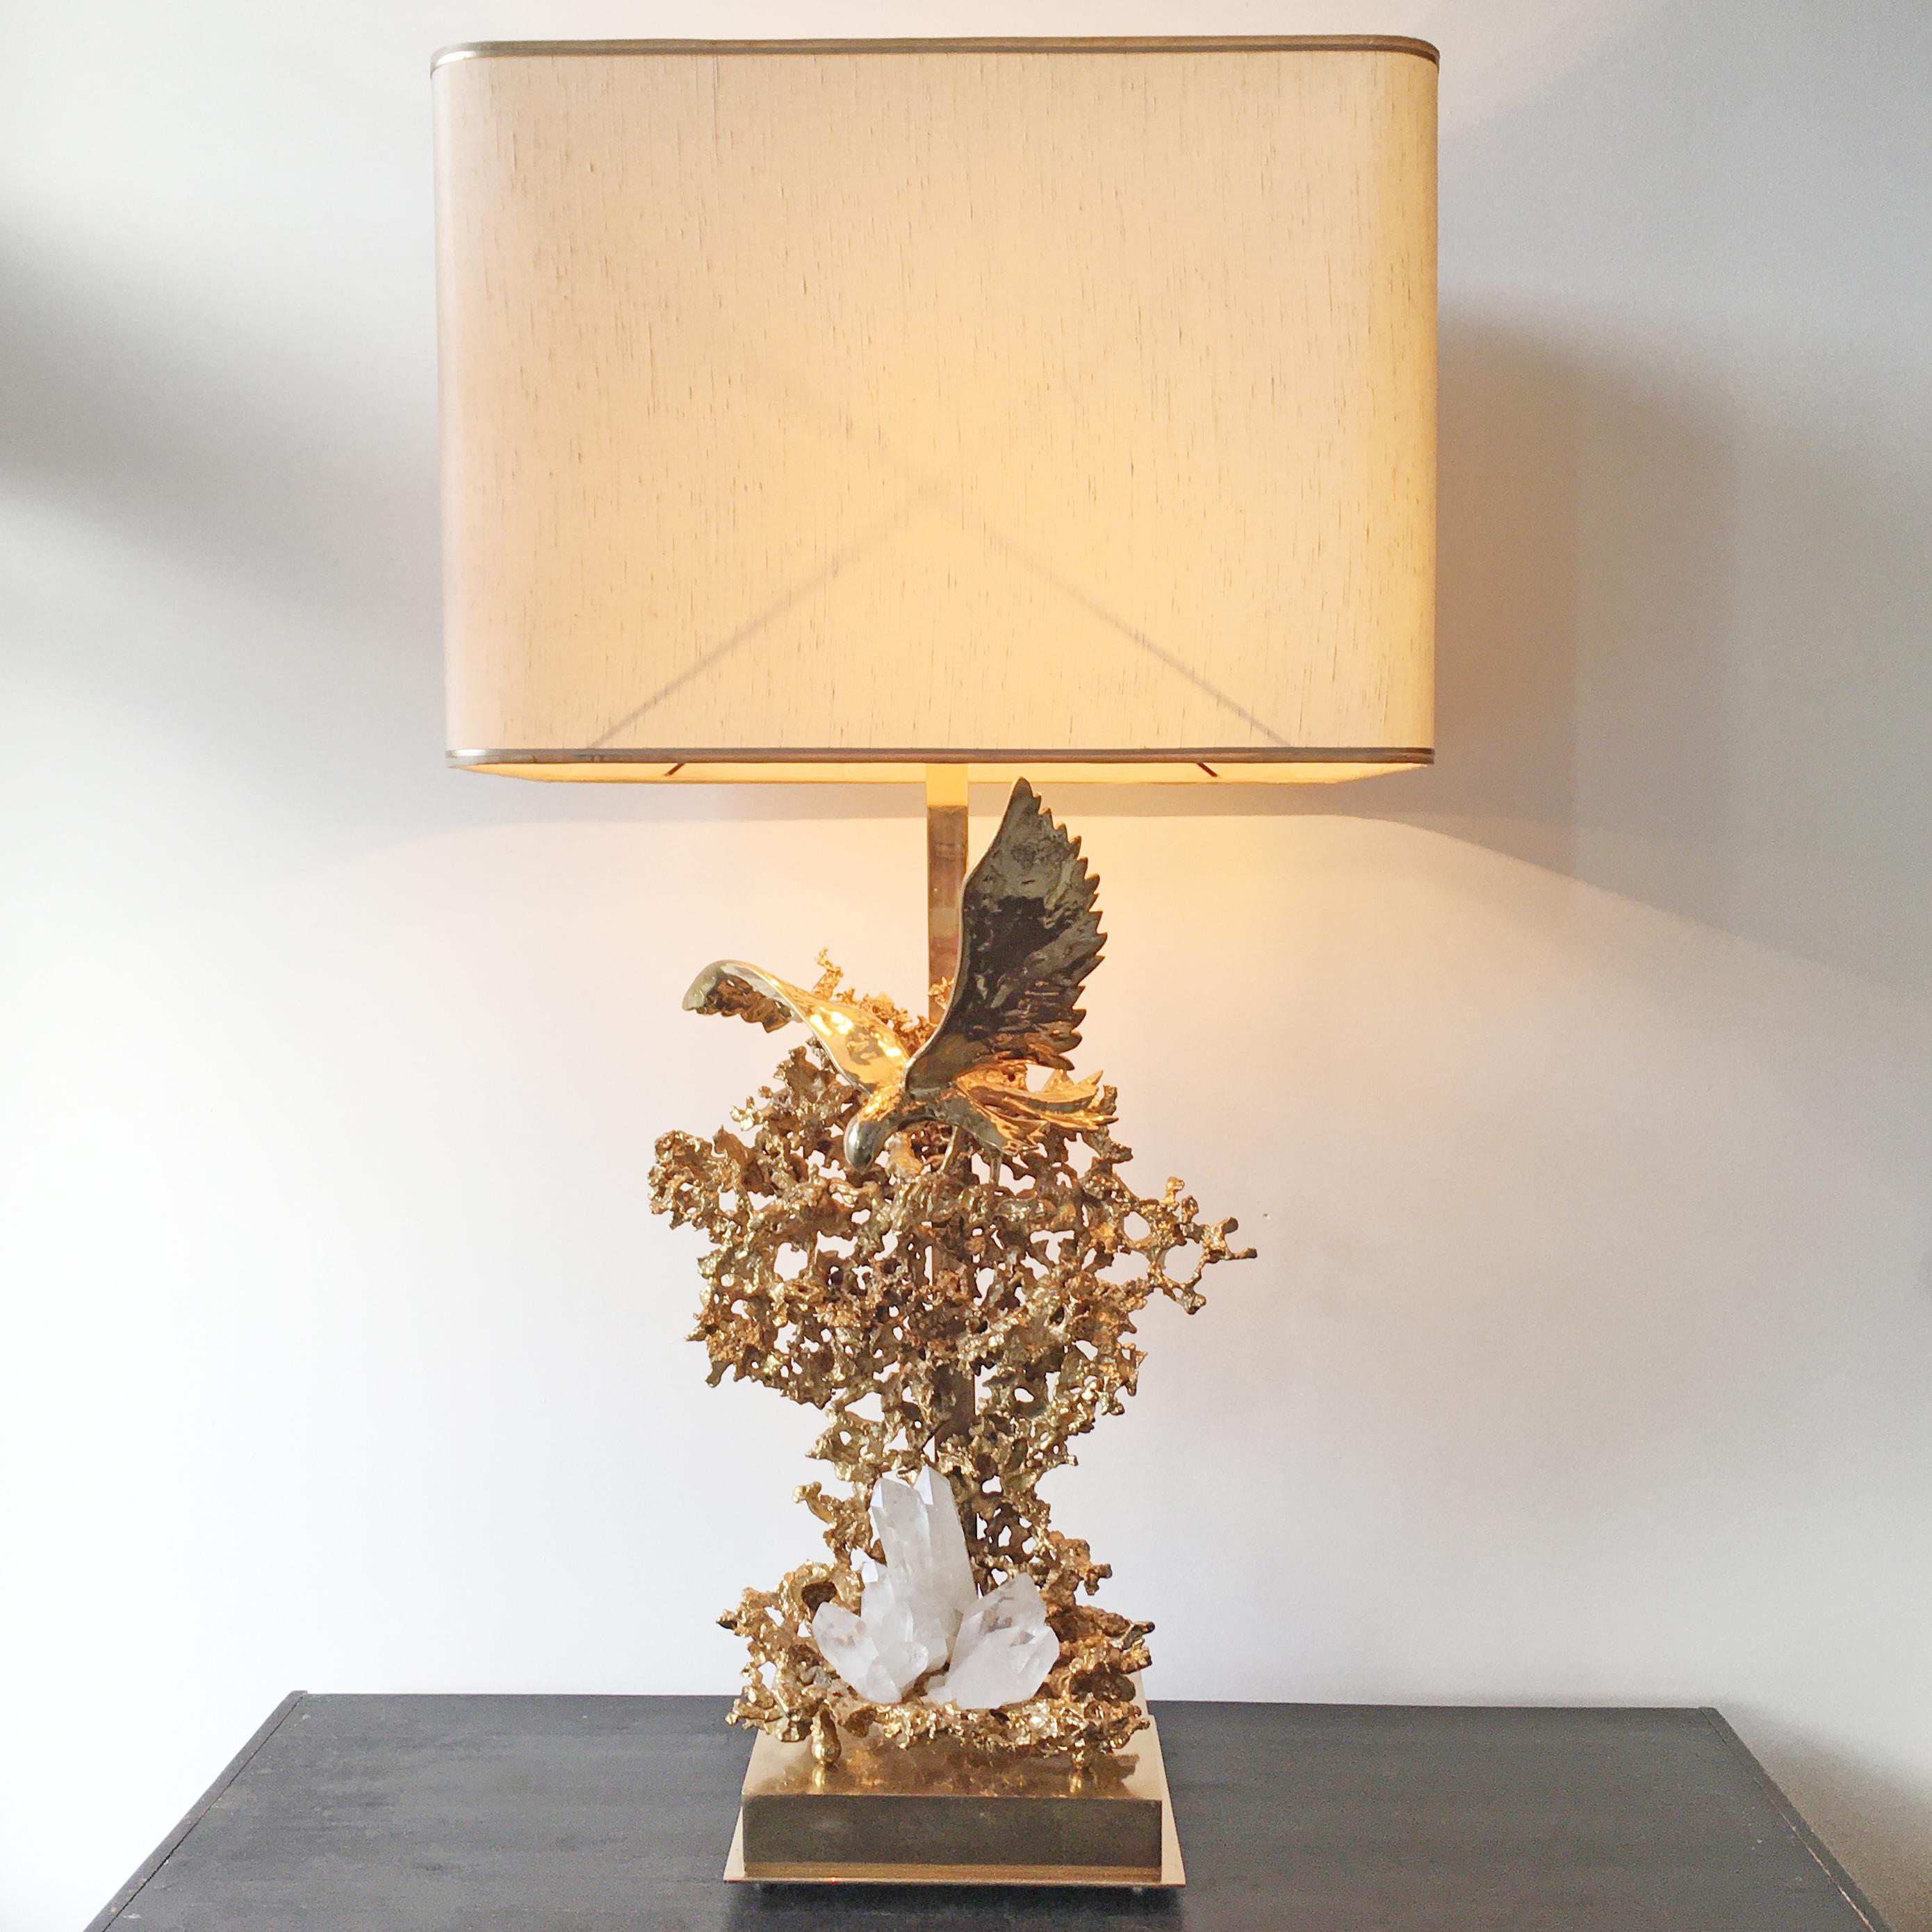 Claude Victor Boeltz sculptural 24-karat gold plated 'exploded' table lamp with eagle and rock crystal inclusions
An incredible statement piece
The natural rock quartz crystal wands are set into the base
France circa 1970
The lamp has 3 bulb